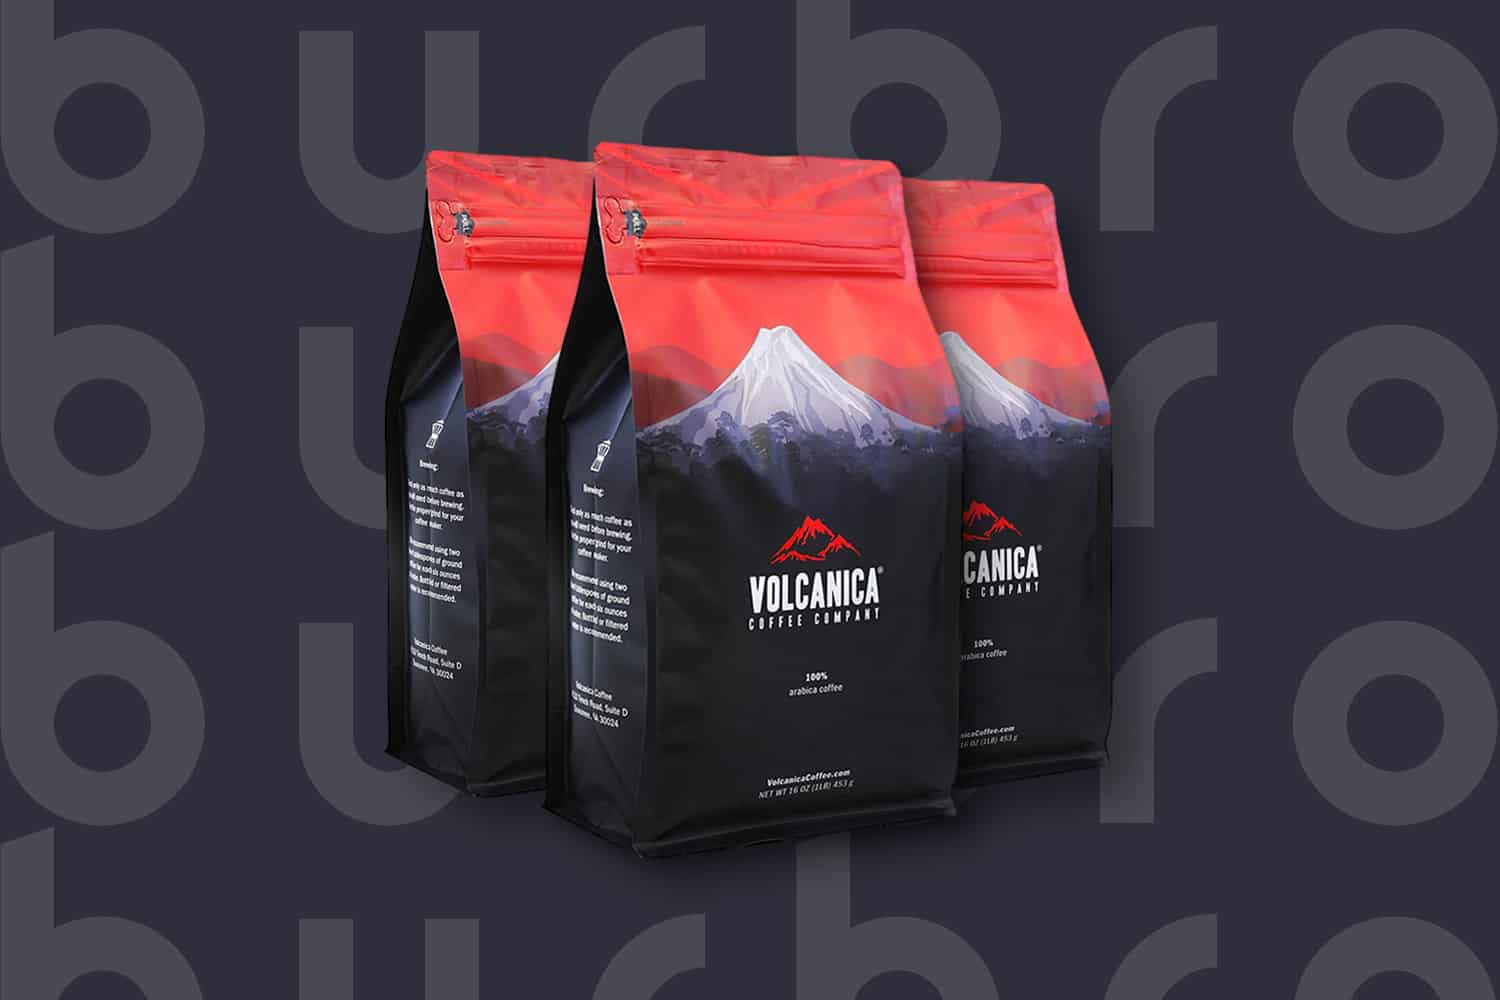 This is the cover photo for our Best Coffee for Cold Brew article. It features a red and navy bag of Volcanica coffee beans.